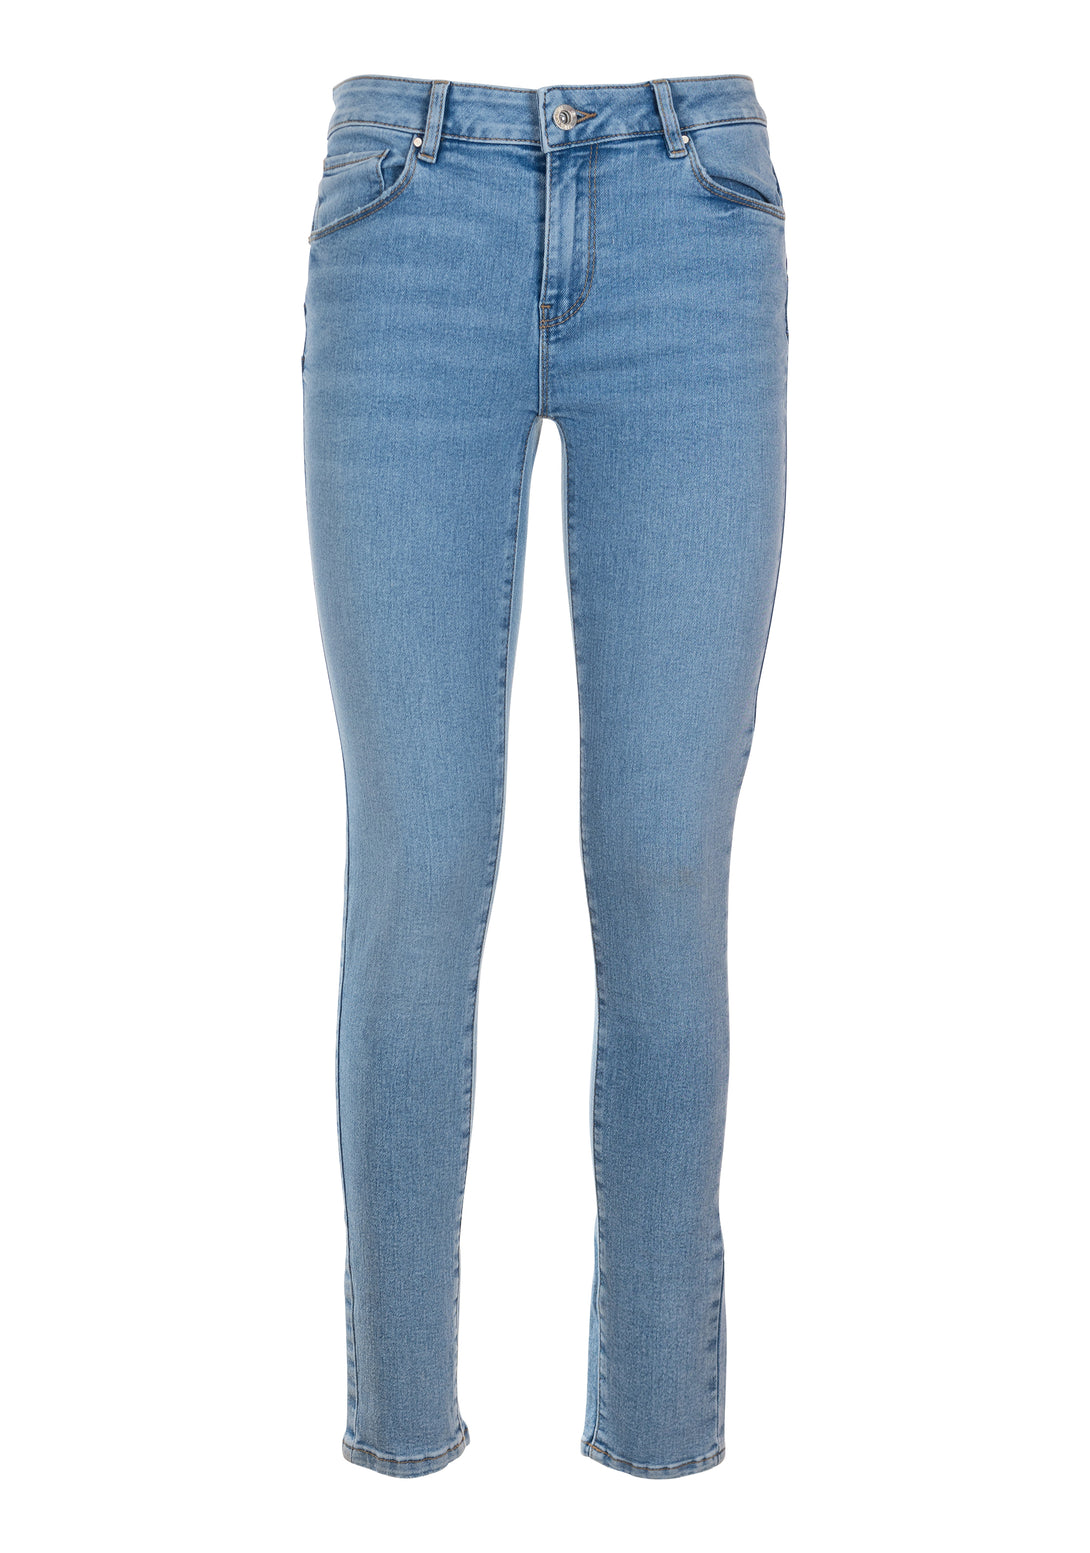 Jeans slim fit push-up effect made in denim with bleached wash